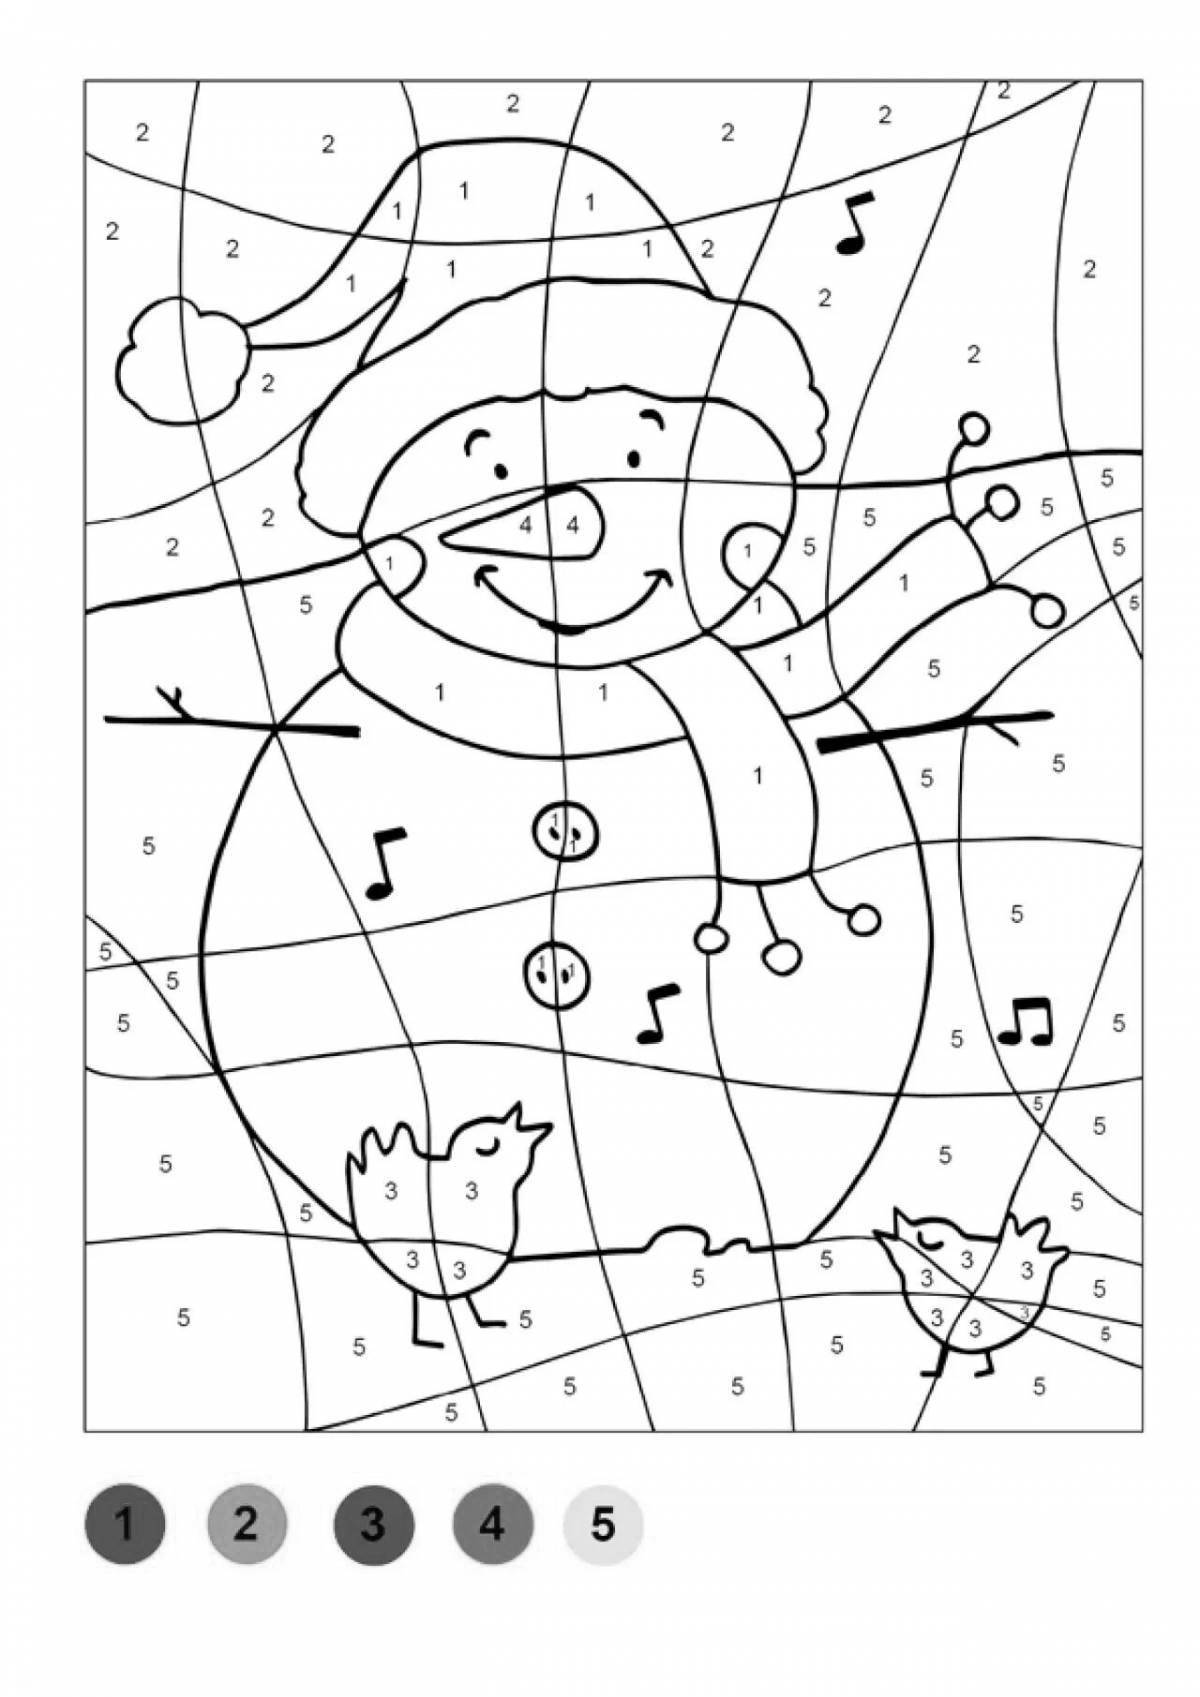 Big snowman coloring by numbers